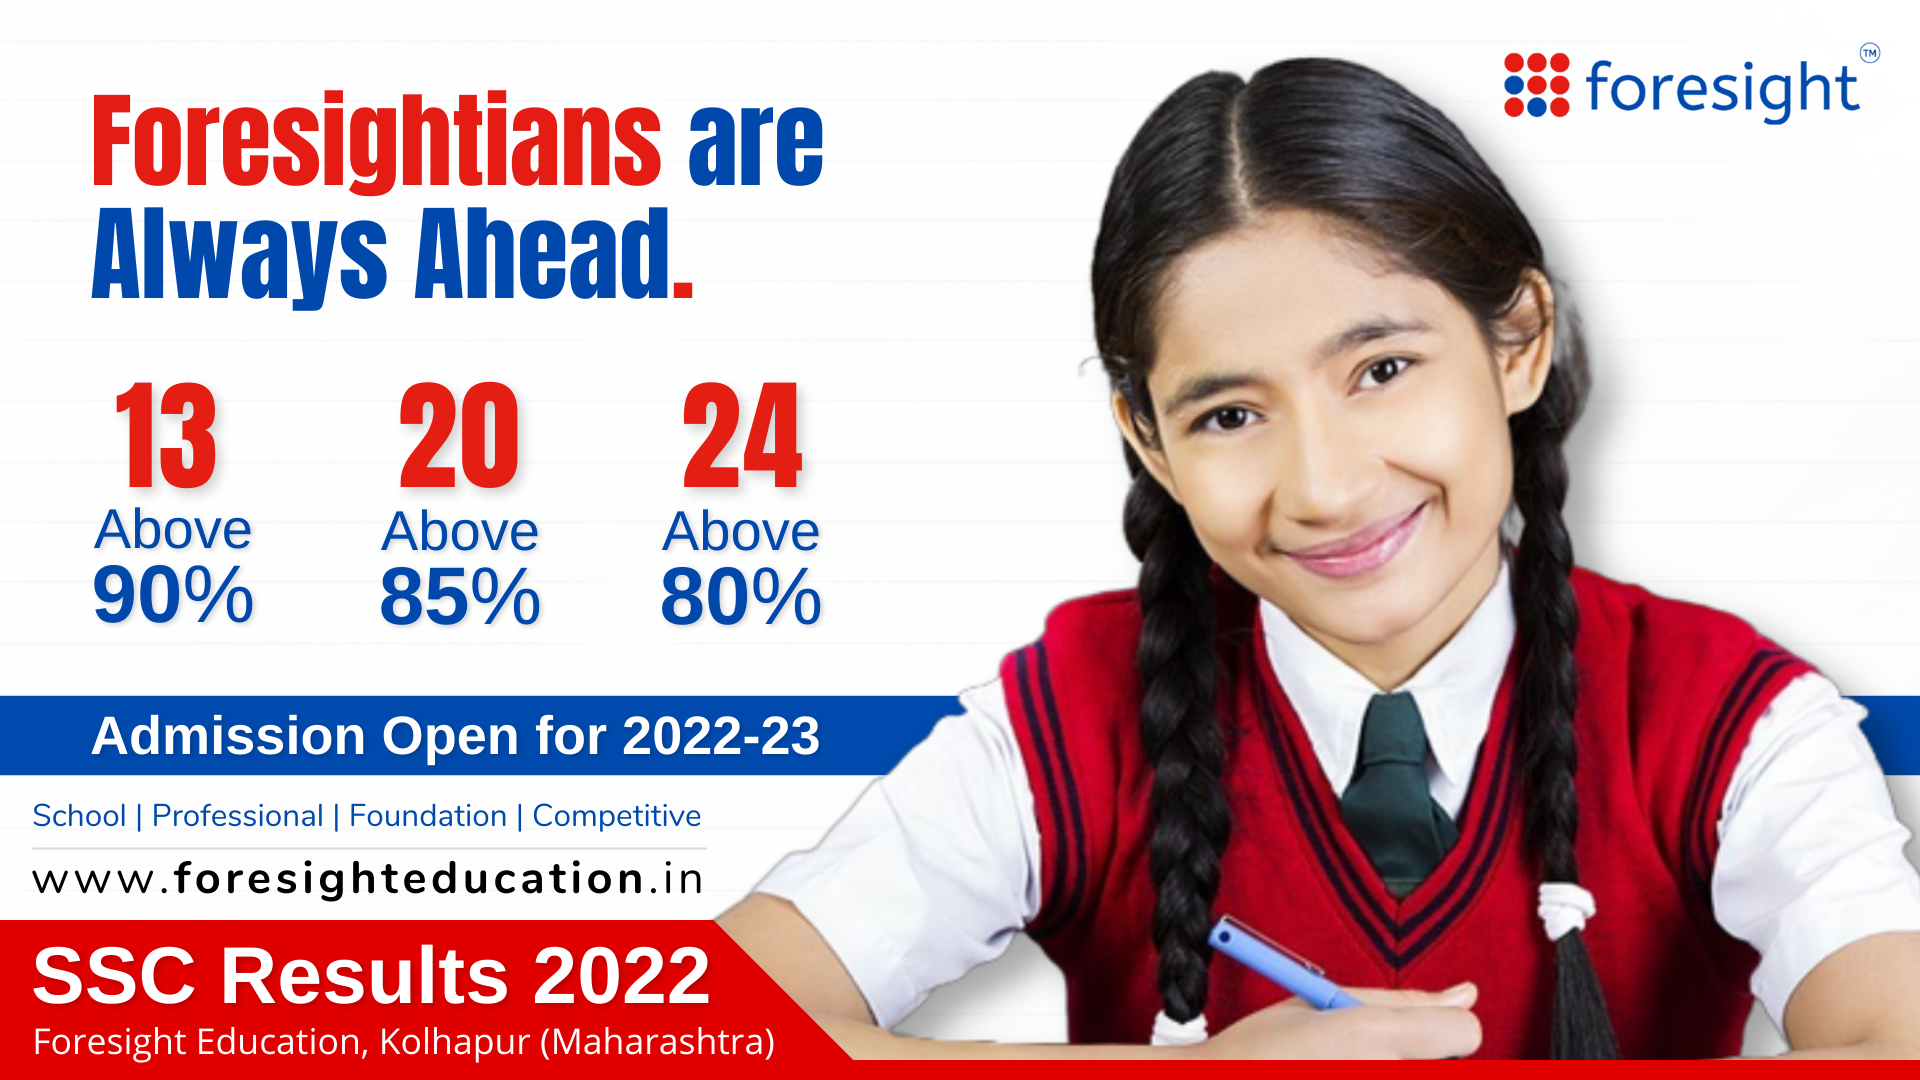 Foresight Education - SSC Results 2022